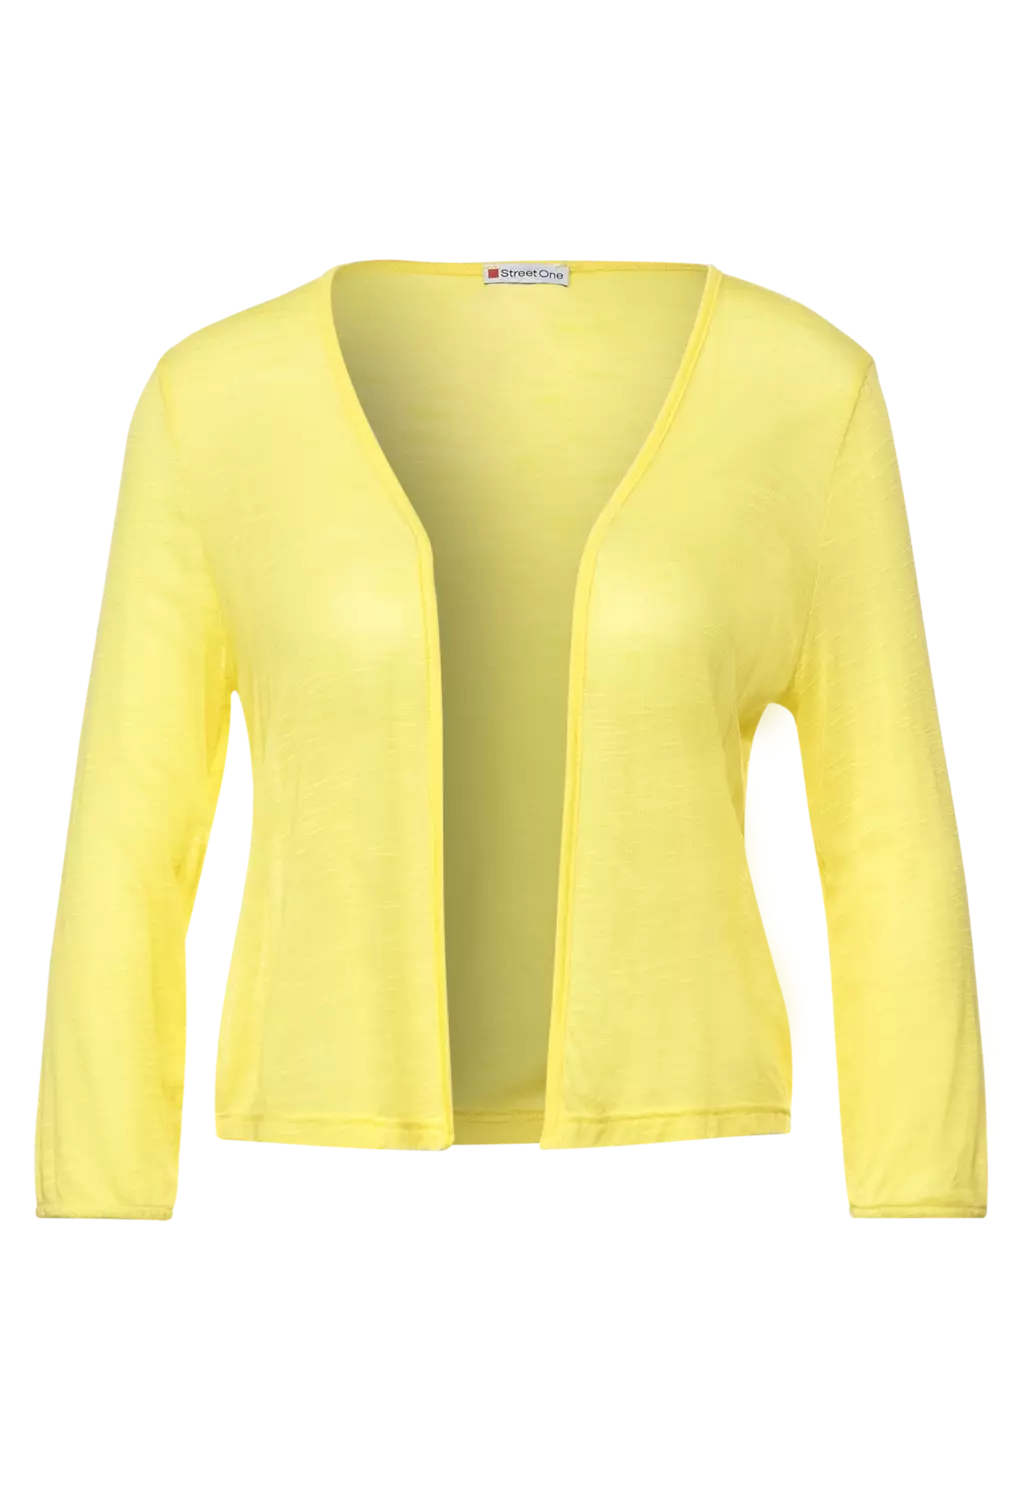 - One - Merry Blues Yellow in Unifarbe Street Shirtjacke | Suse Cotton